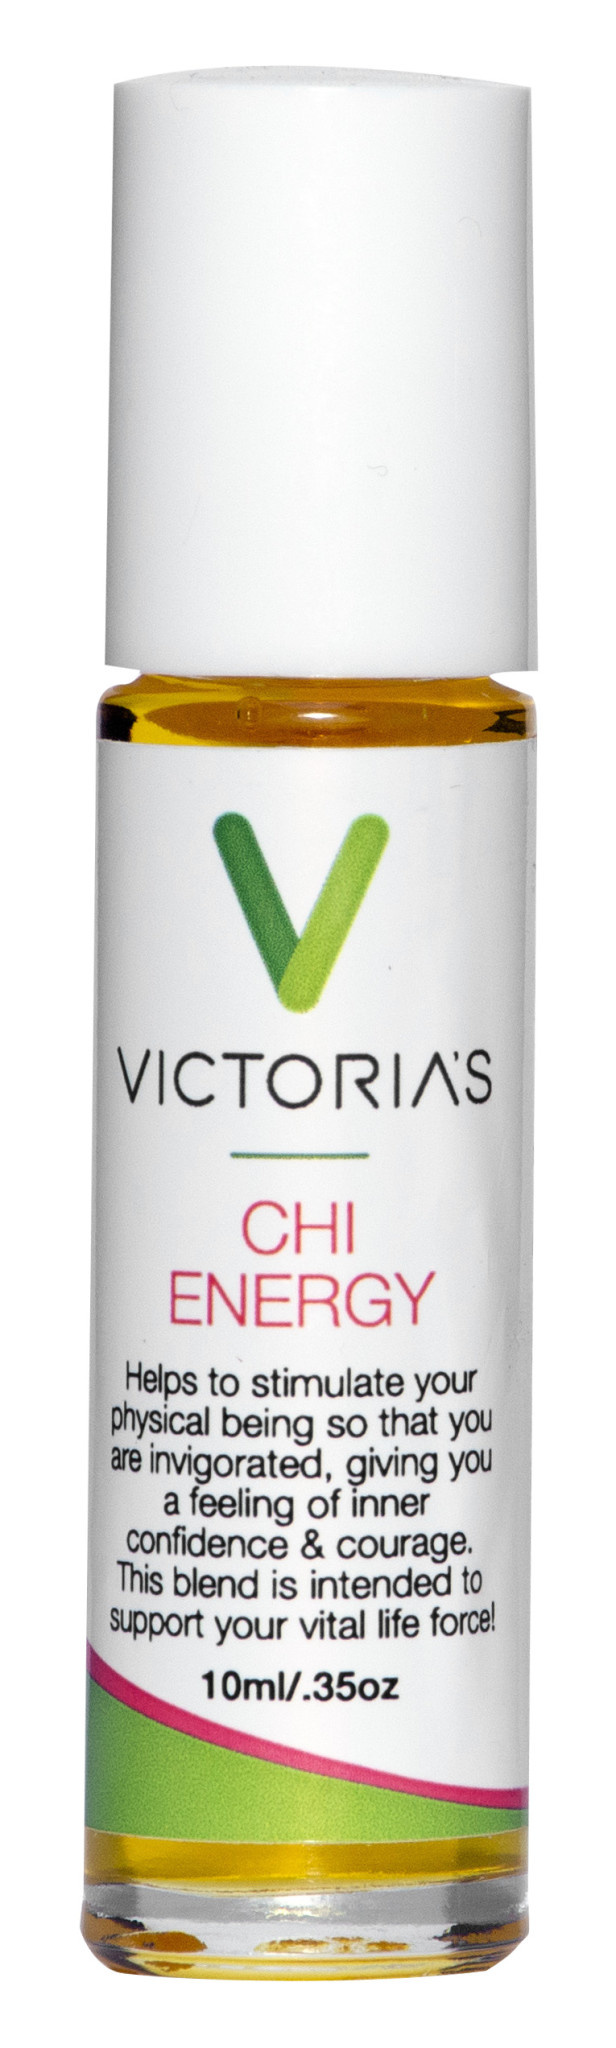 Victoria's - Aromatherapy Blend Roll-on - Chi Energy - 10ml